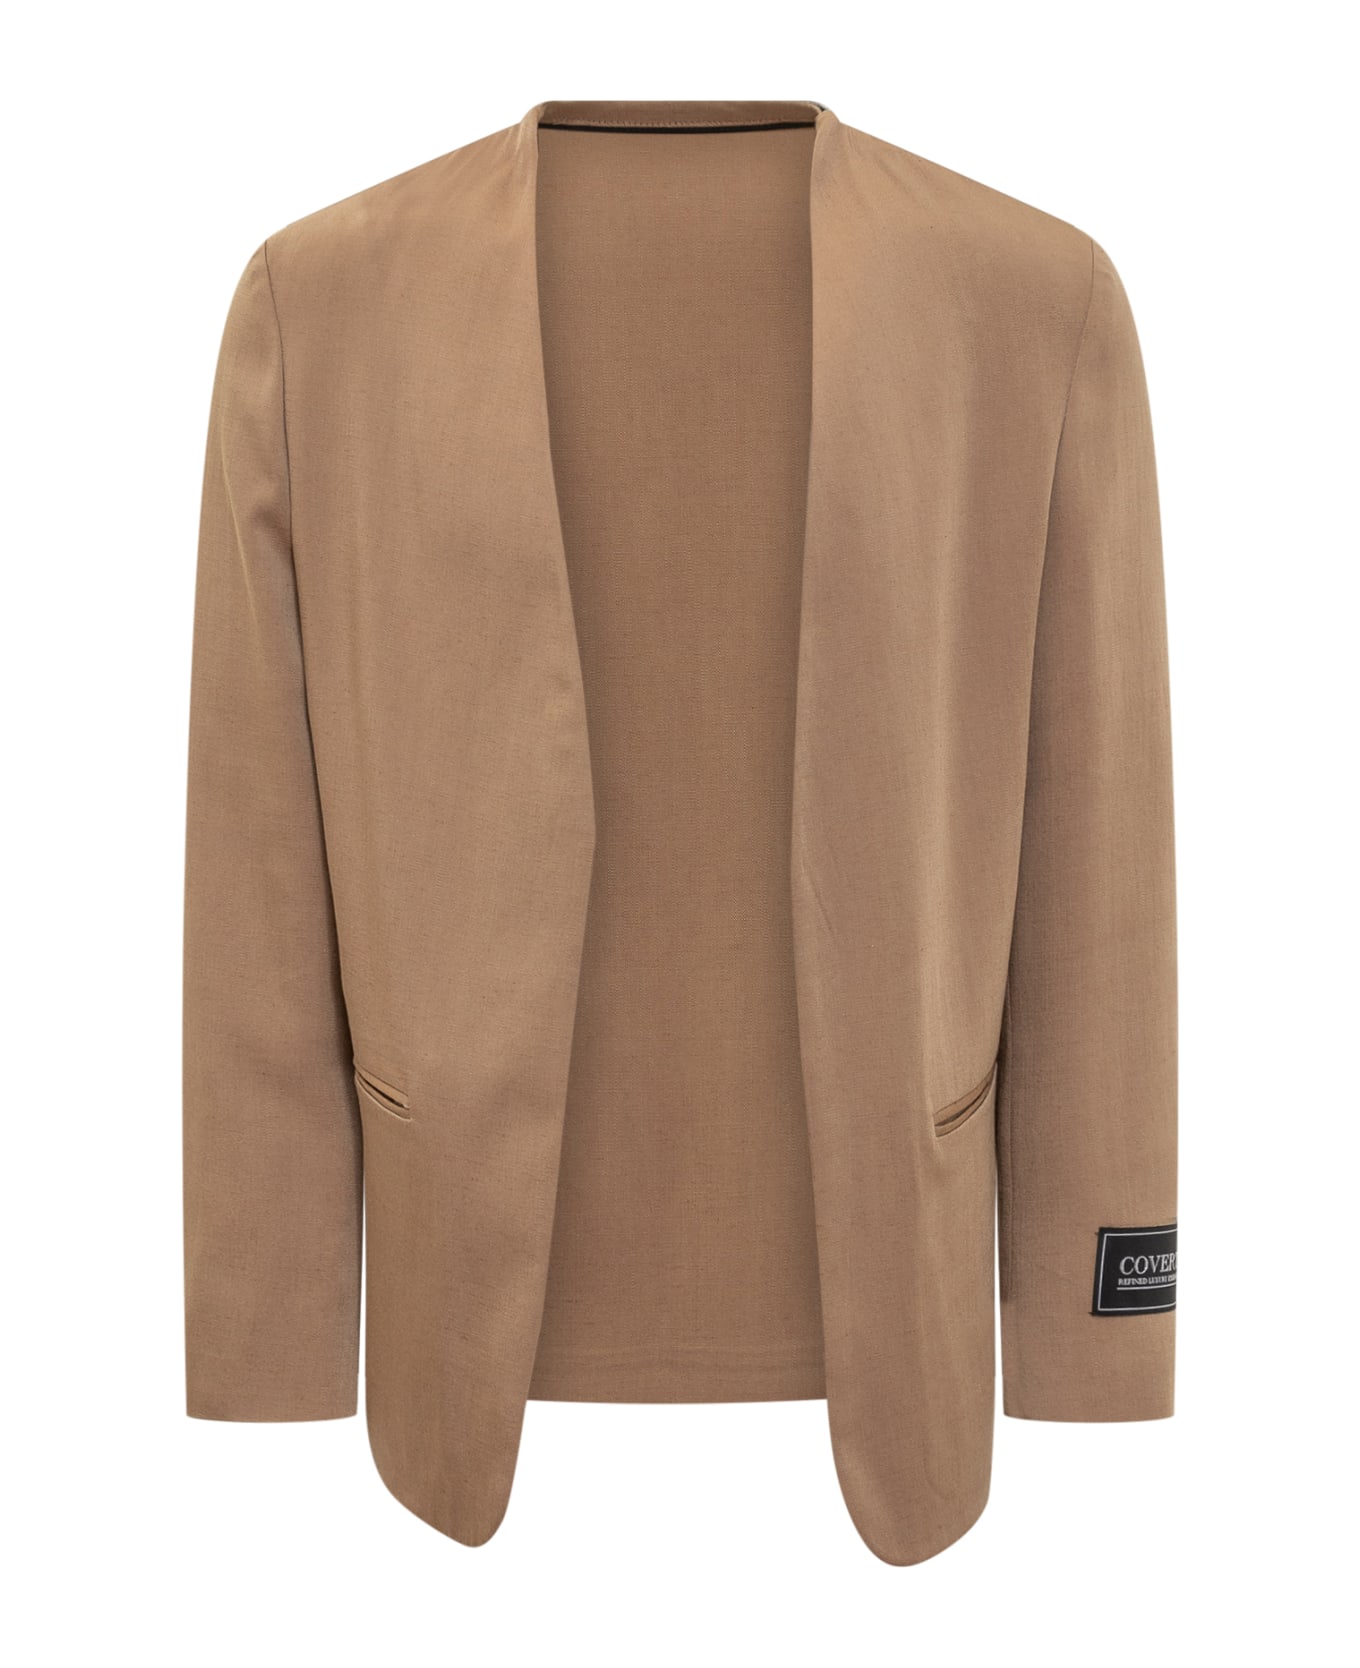 Covert Blazer Open At The Front - TAN